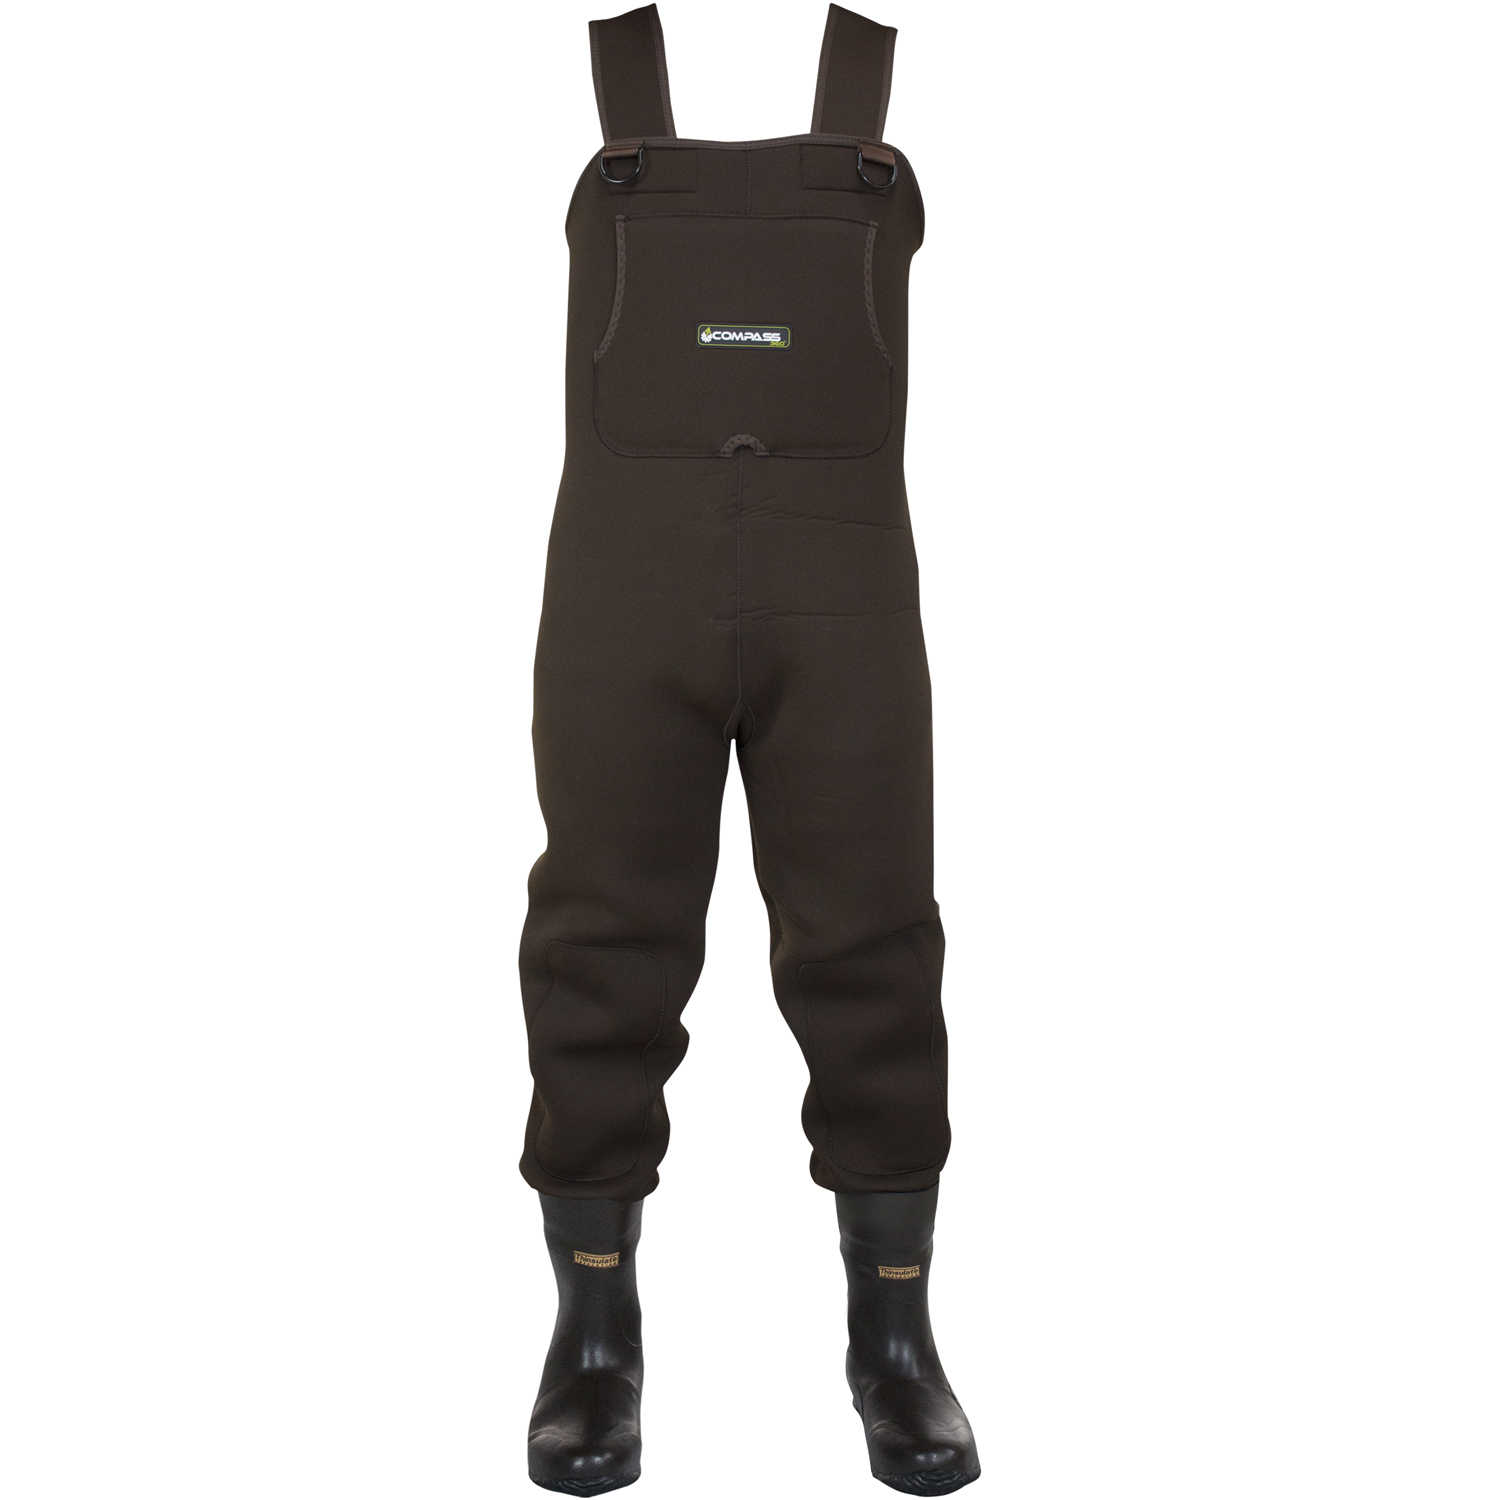 Compass 360 Rogue 3.5mm Neoprene Cleated Sole Chest Waders, Size 12 | eBay